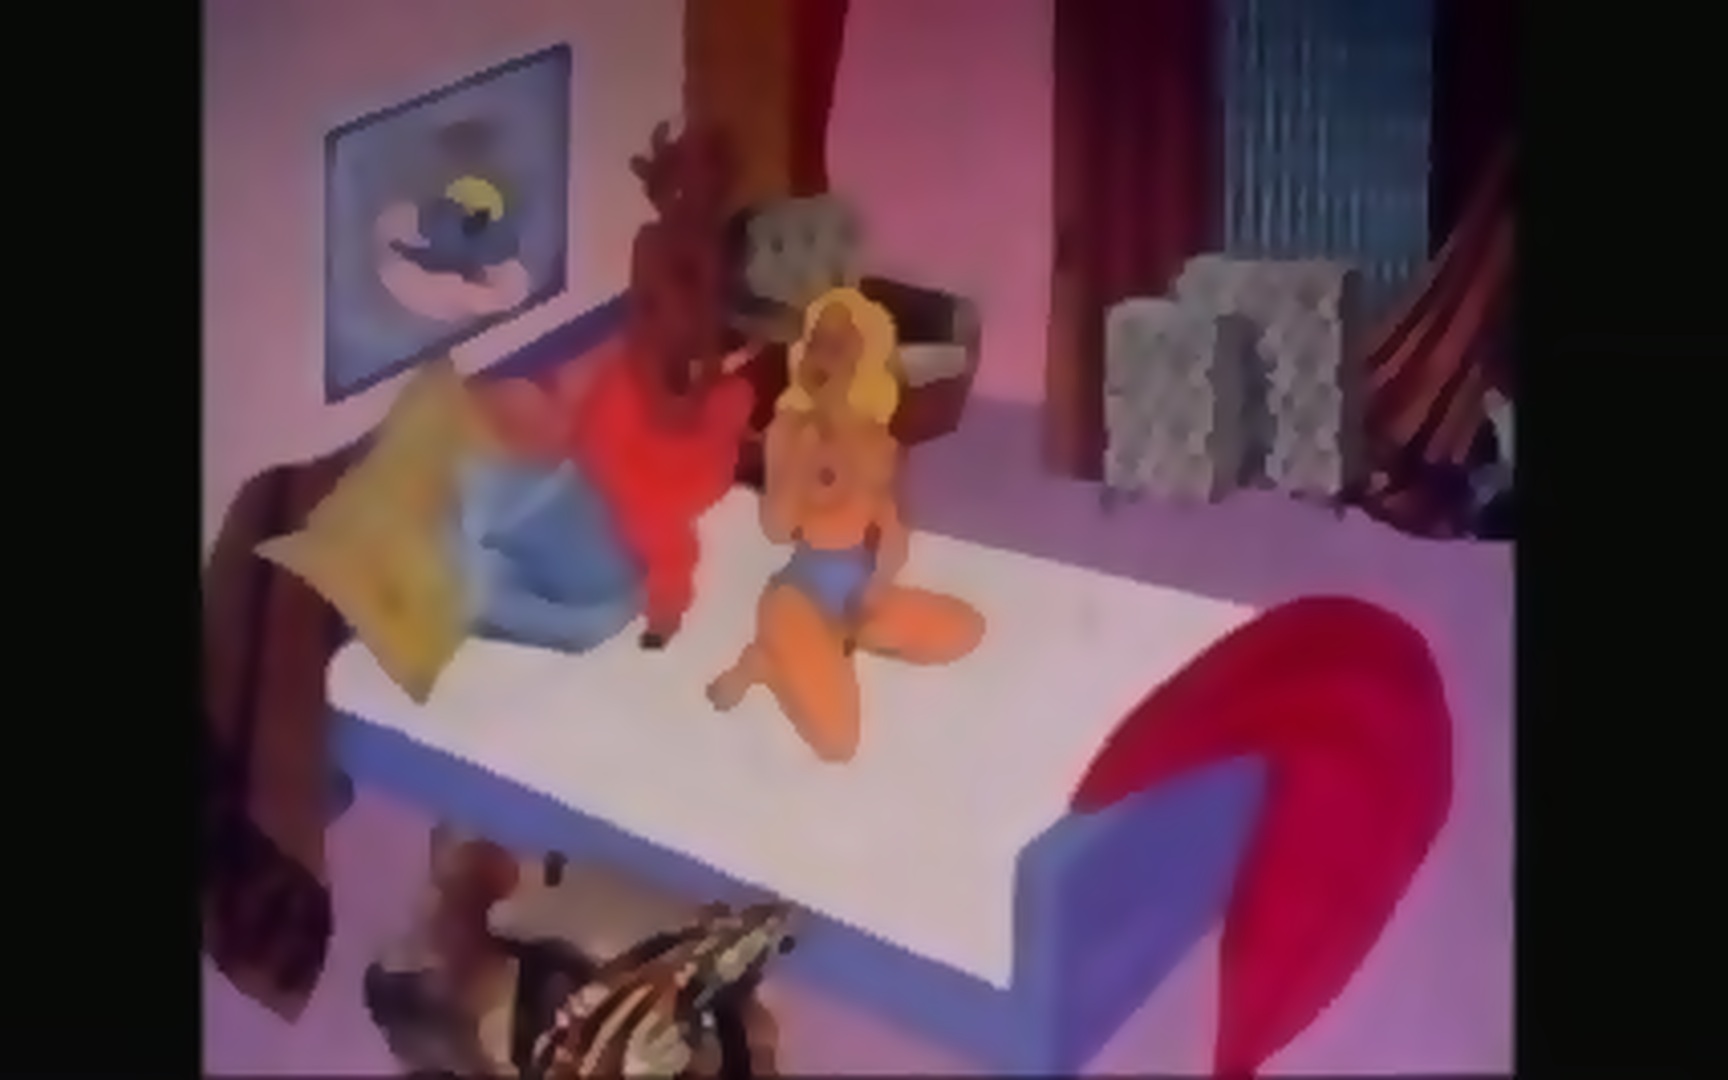 Funny And Weird Vintage Anime Sexual Intercourse Segments Eporner